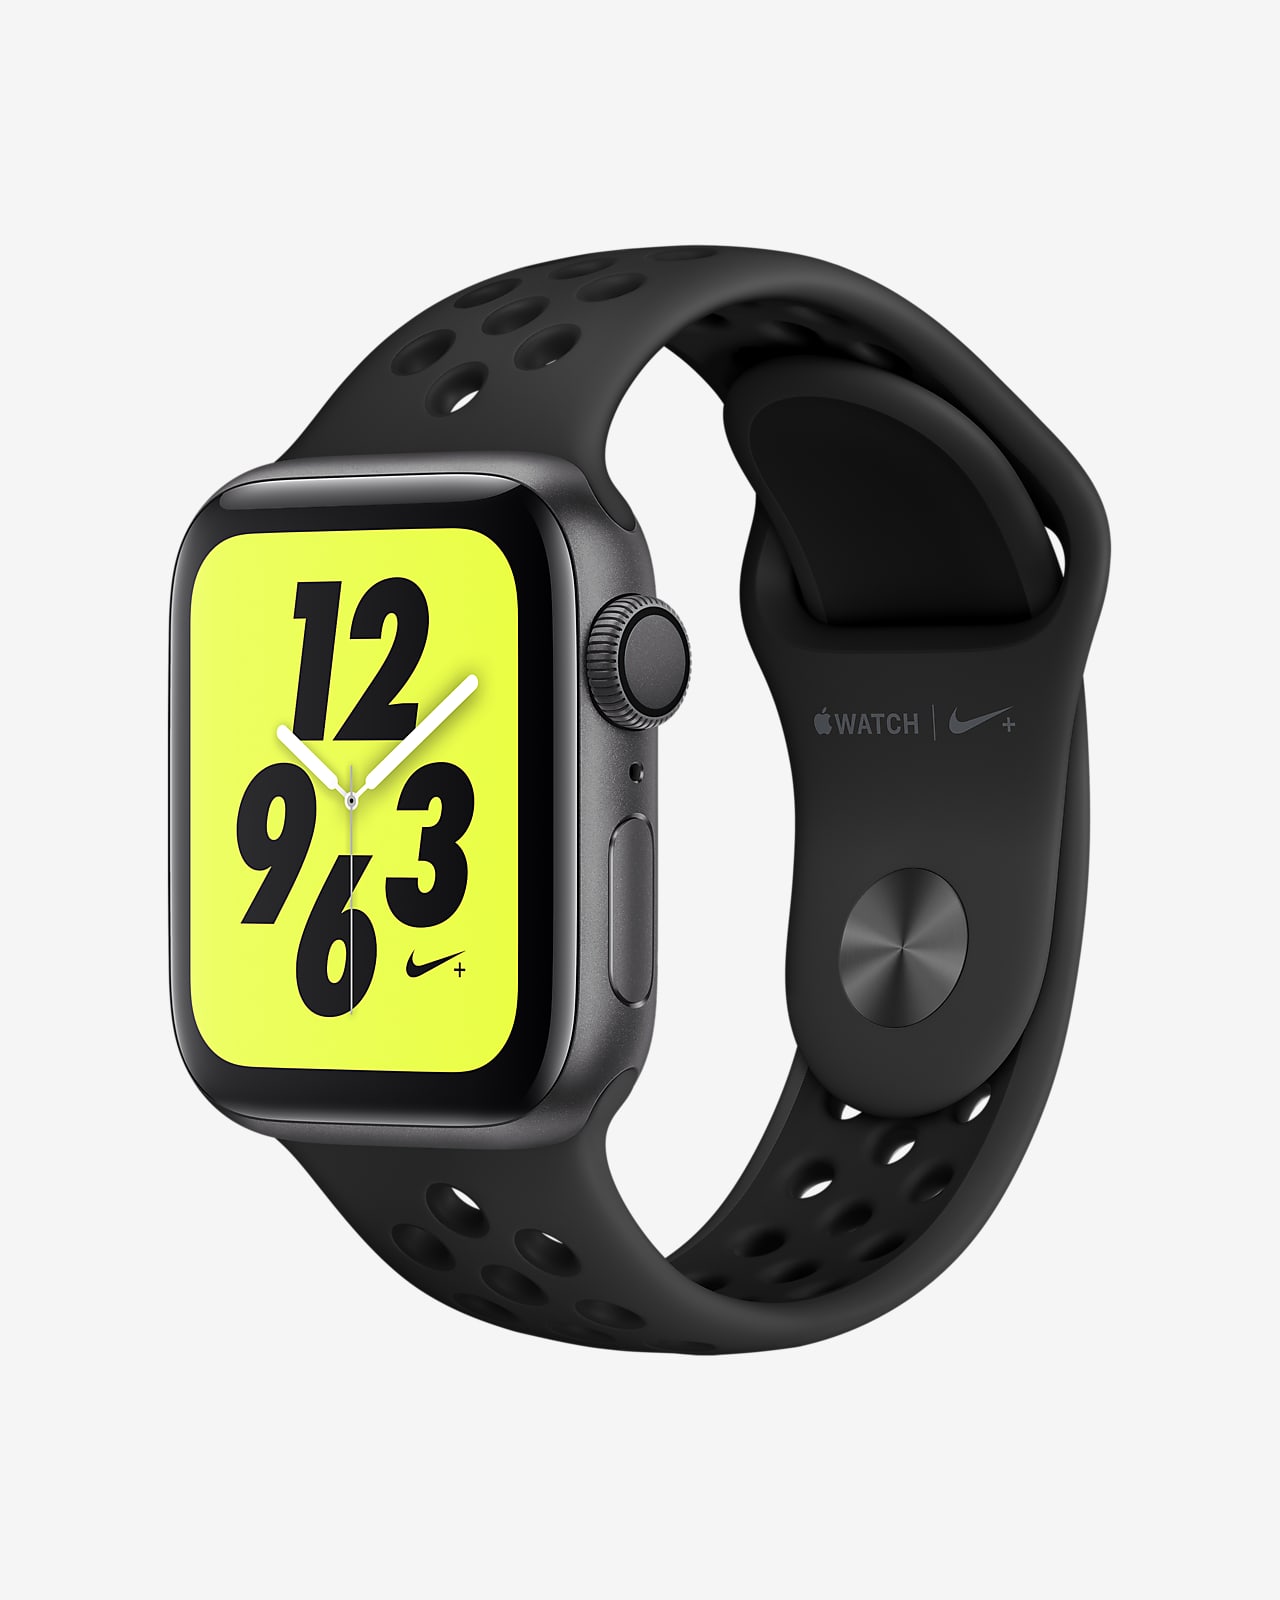 Apple Watch Nike+ Series 4 (GPS) with Nike Sport Band Open Box 